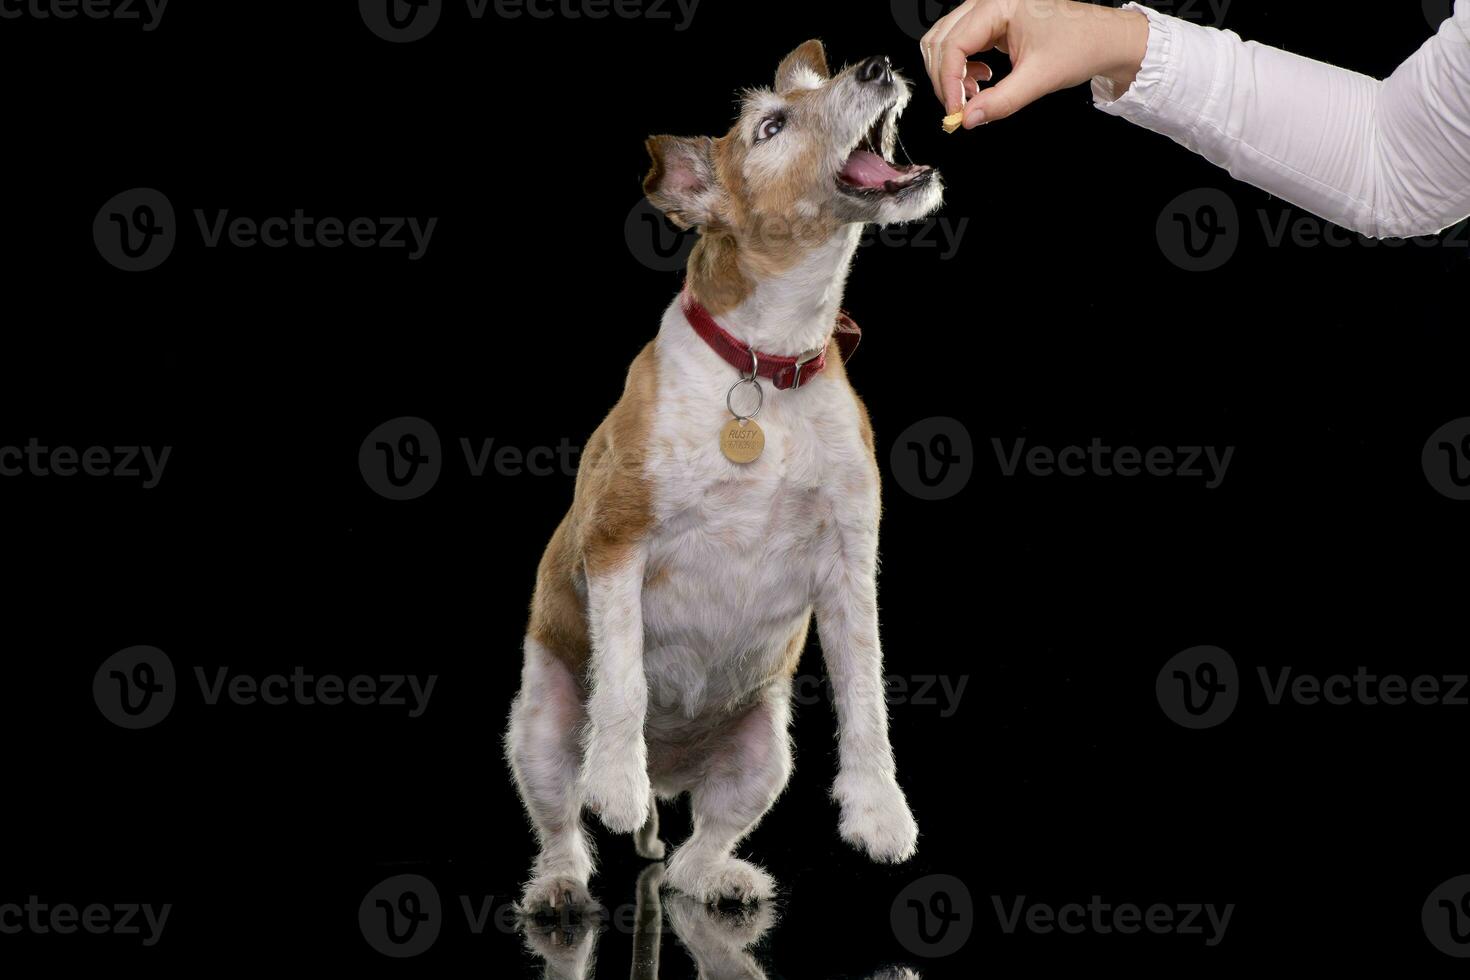 Hand feeding of an old, adorable Jack Russell terrier photo